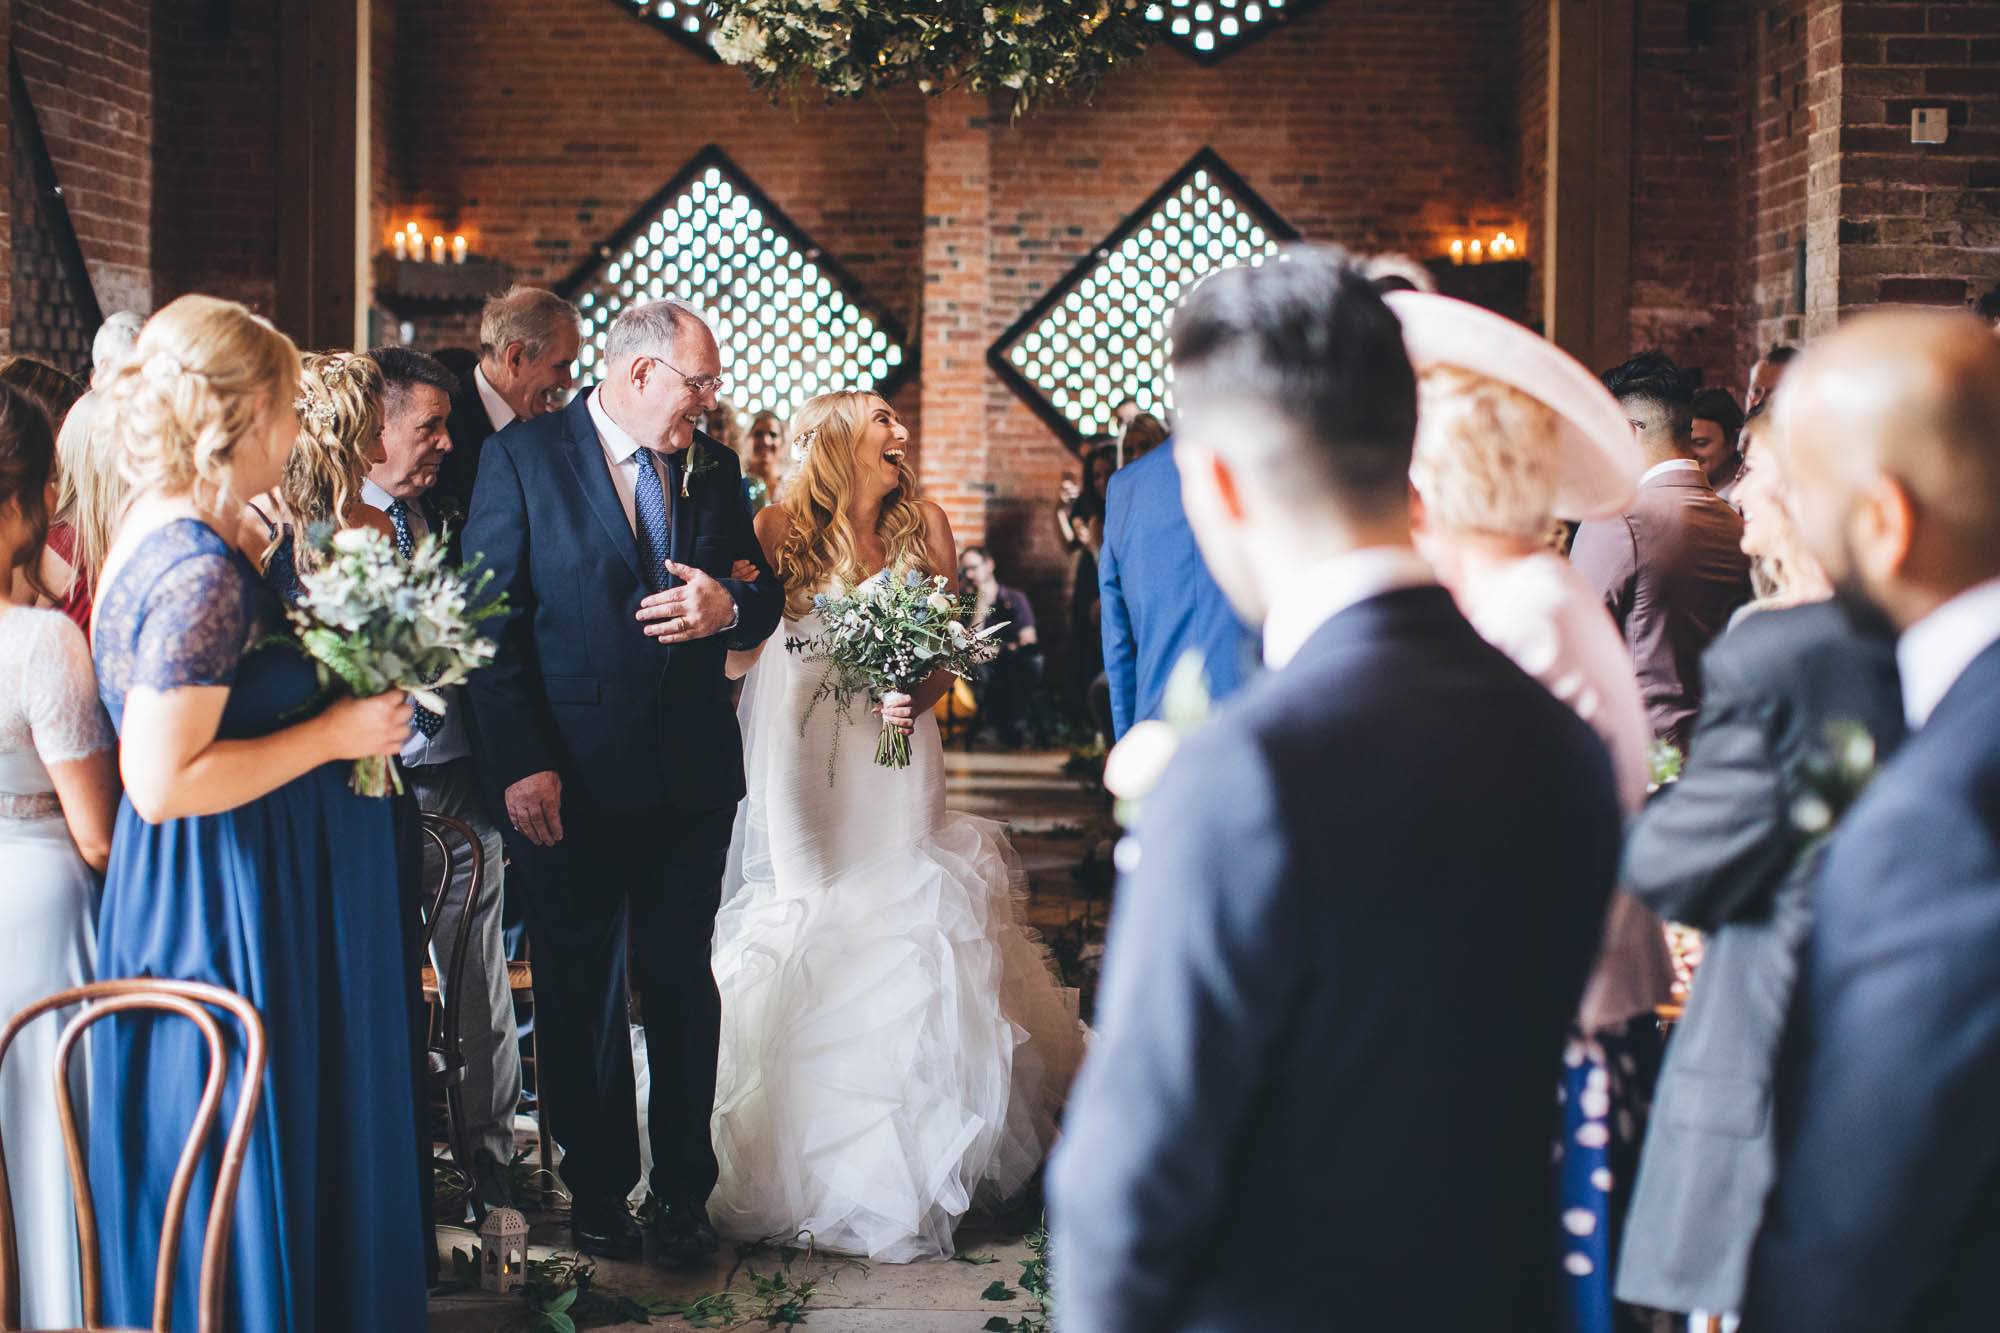 Father and Bride laugh with guests as they walk down the aisle in rustic barn